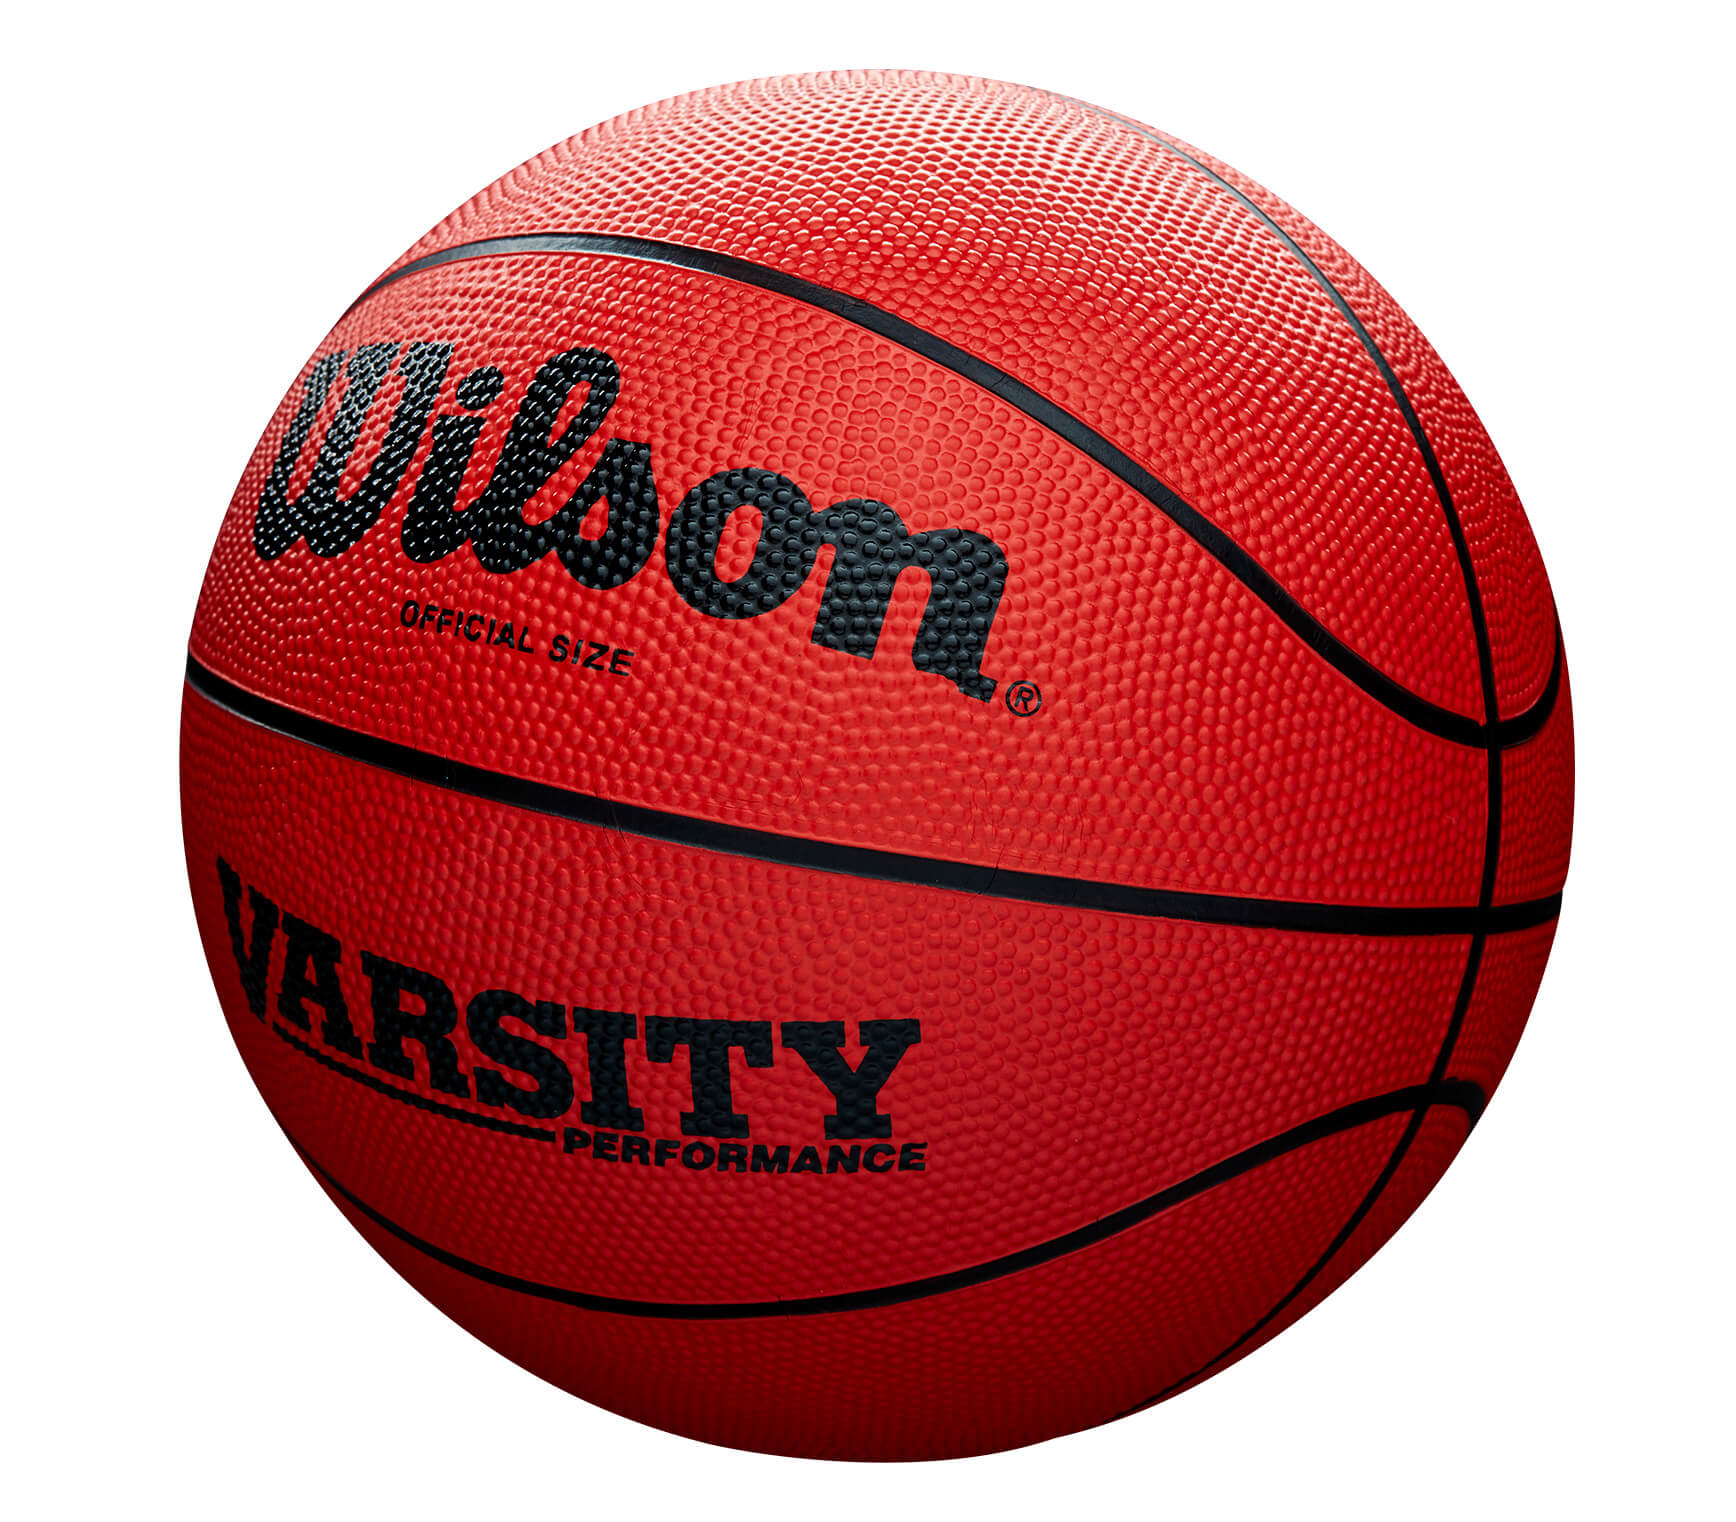 Wilson Varsity Rubber Basketball - Size 7 - Basketball - Discontinued